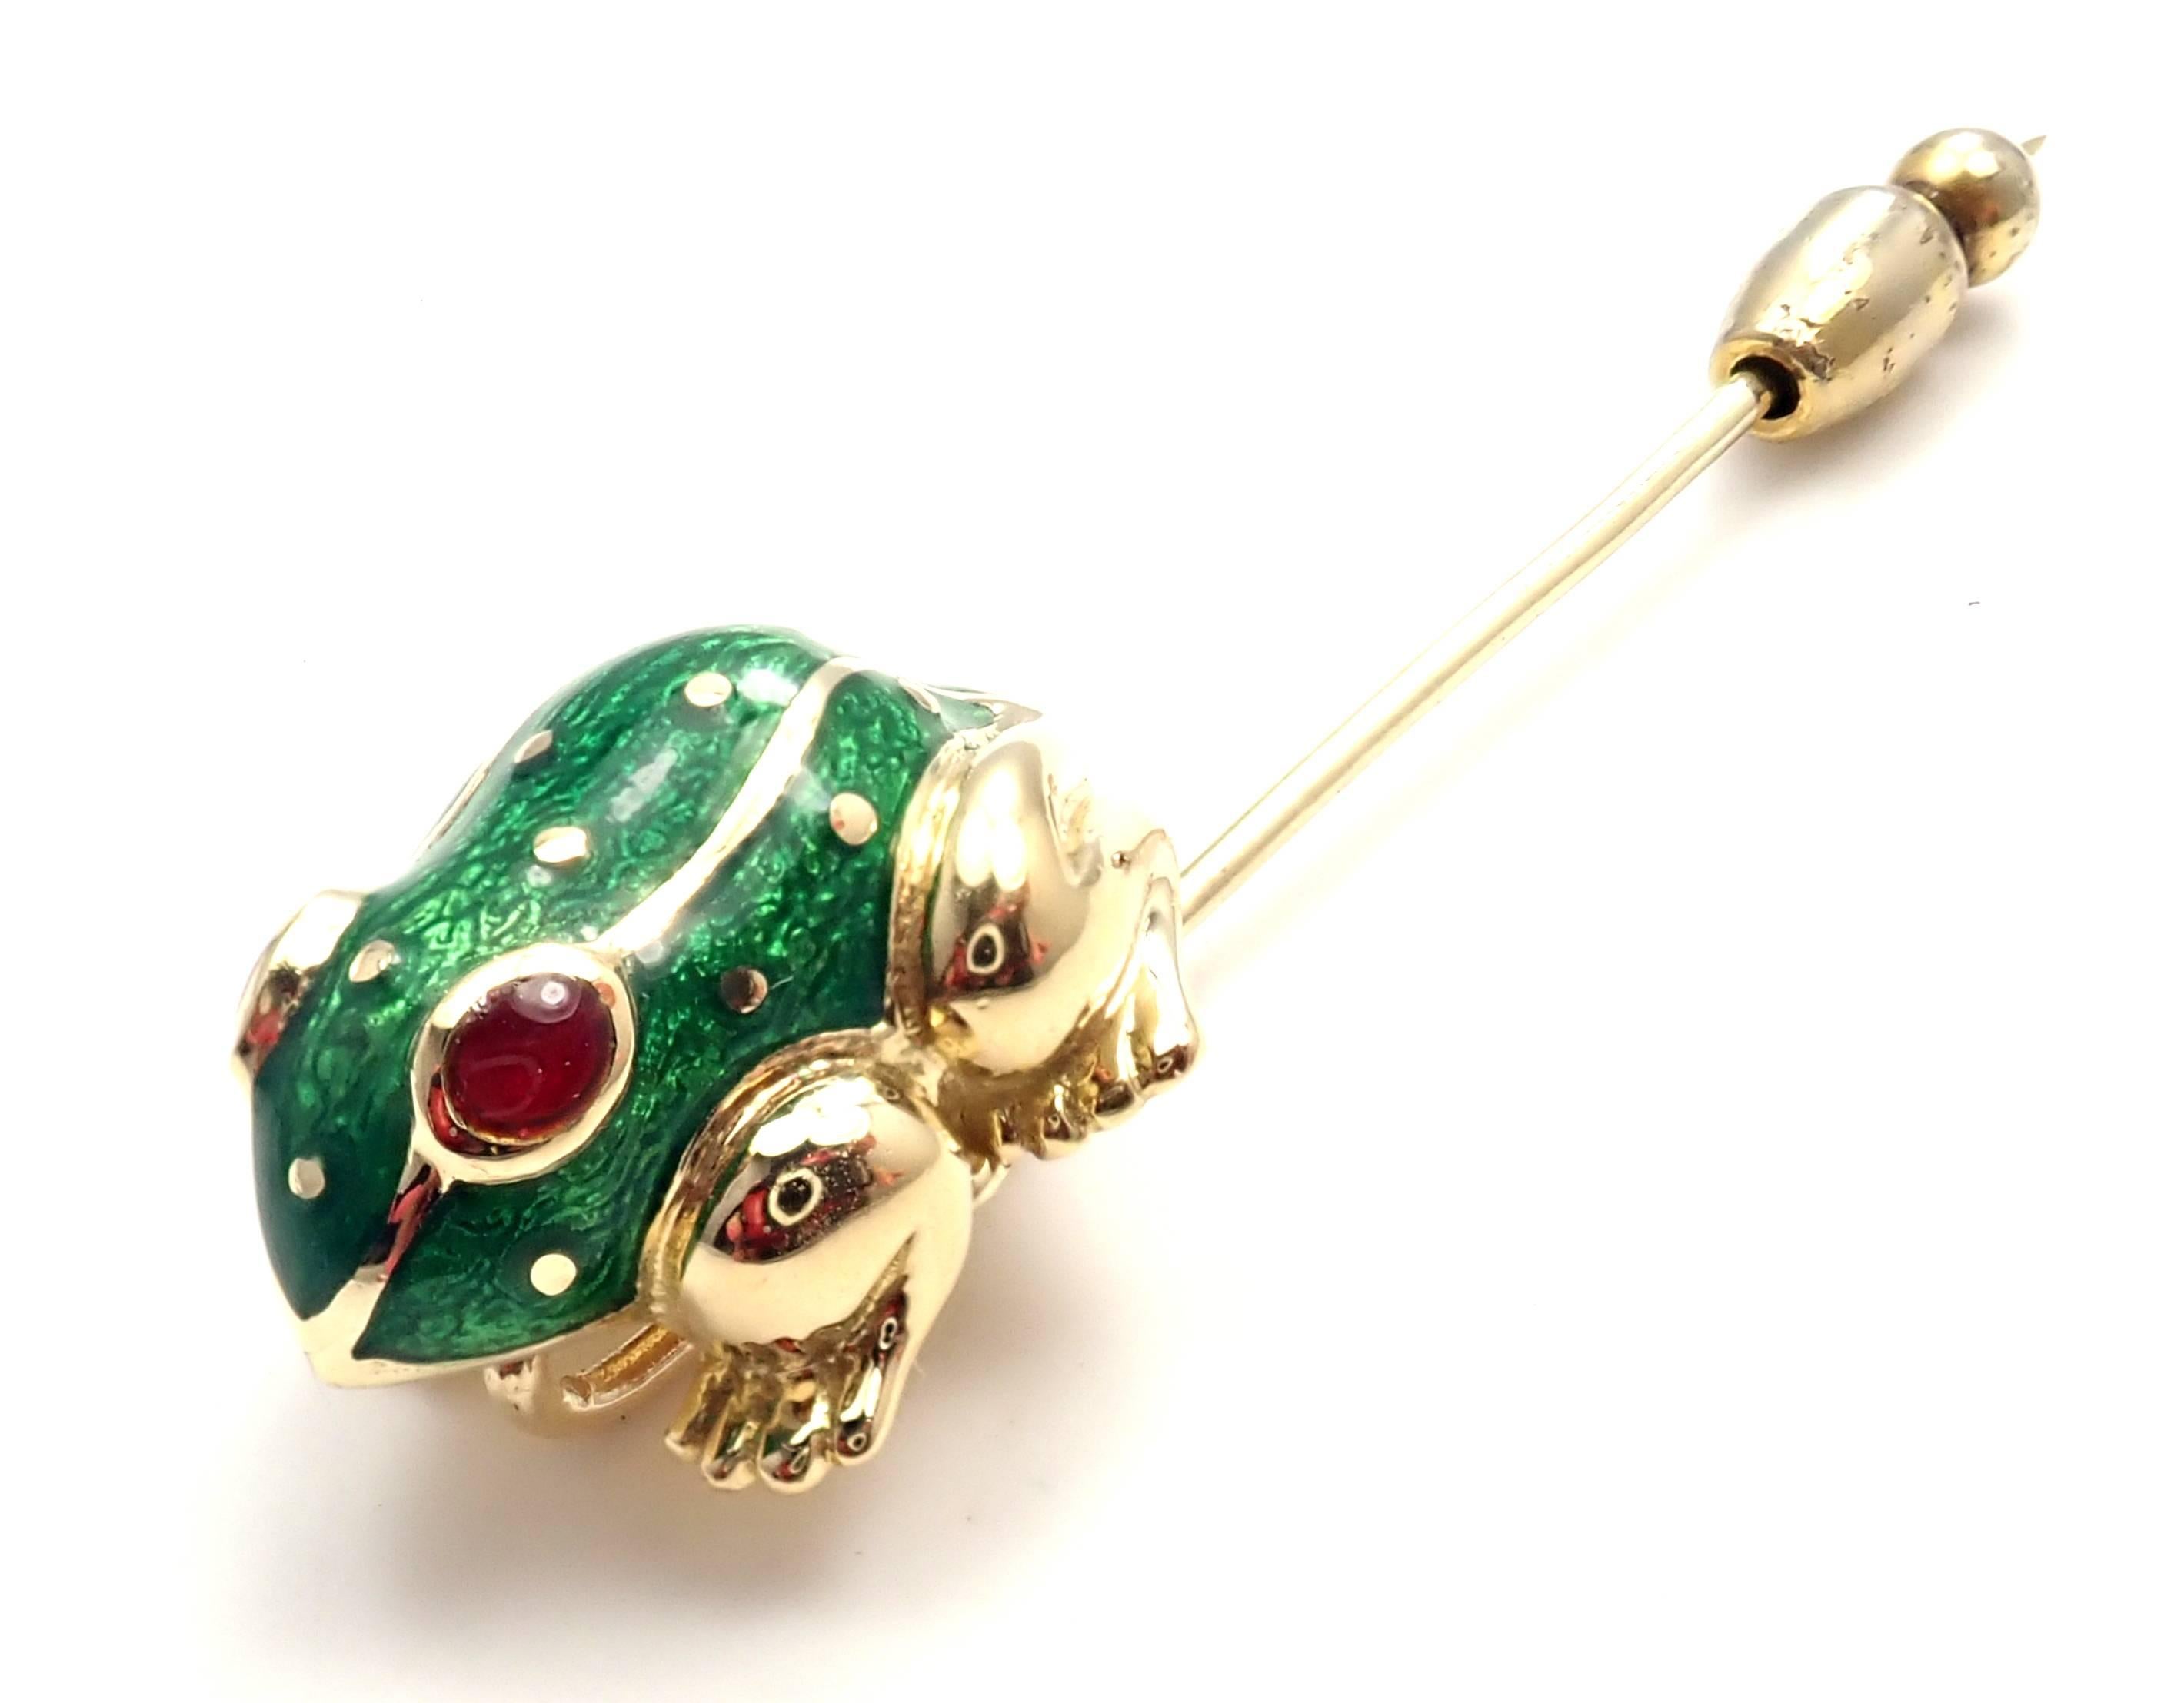 18k Yellow Gold Ruby & Green Enamel Lucky Frog Stick Pin Brooch by David Webb. 
With 2 cabochon ruby eyes
Details: 
Measurements: Frog: 20mm x 15mm
Weight: 8.3 grams
Stamped Hallmark:  Webb 18K
*Free Shipping within the United States*
YOUR PRICE: